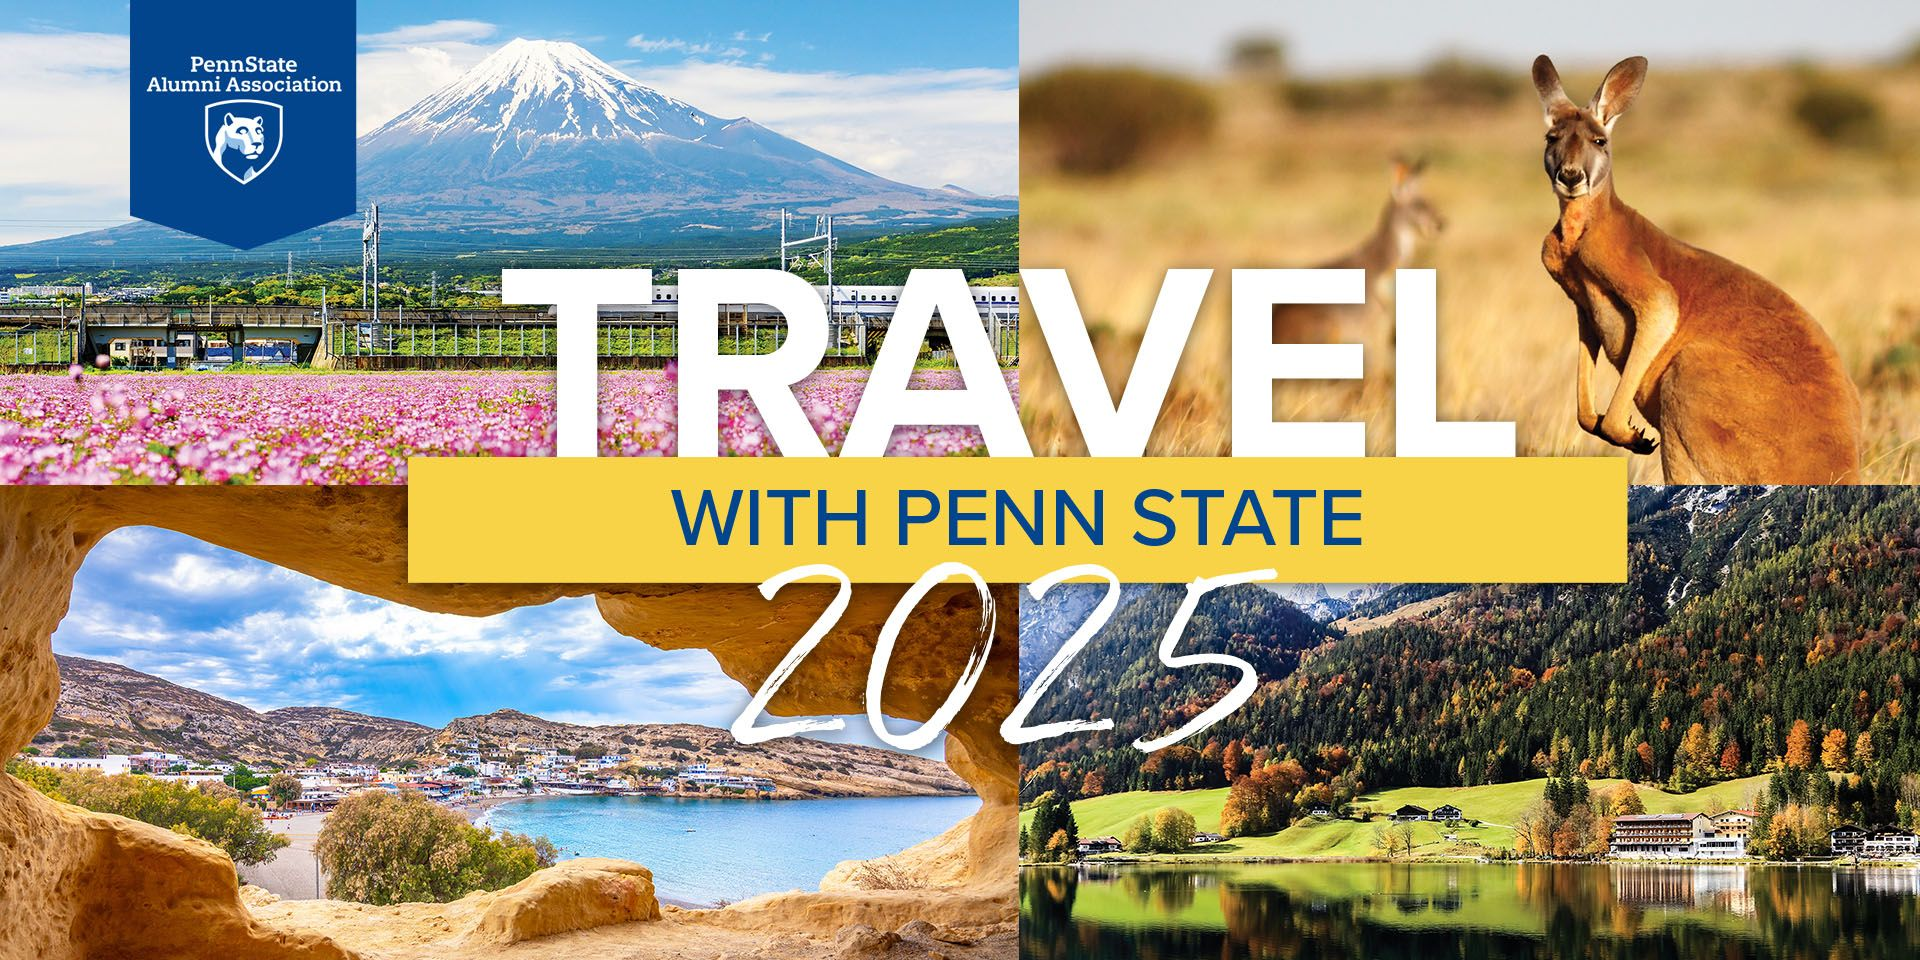 Travel with Penn State 2025 logo on images of nature